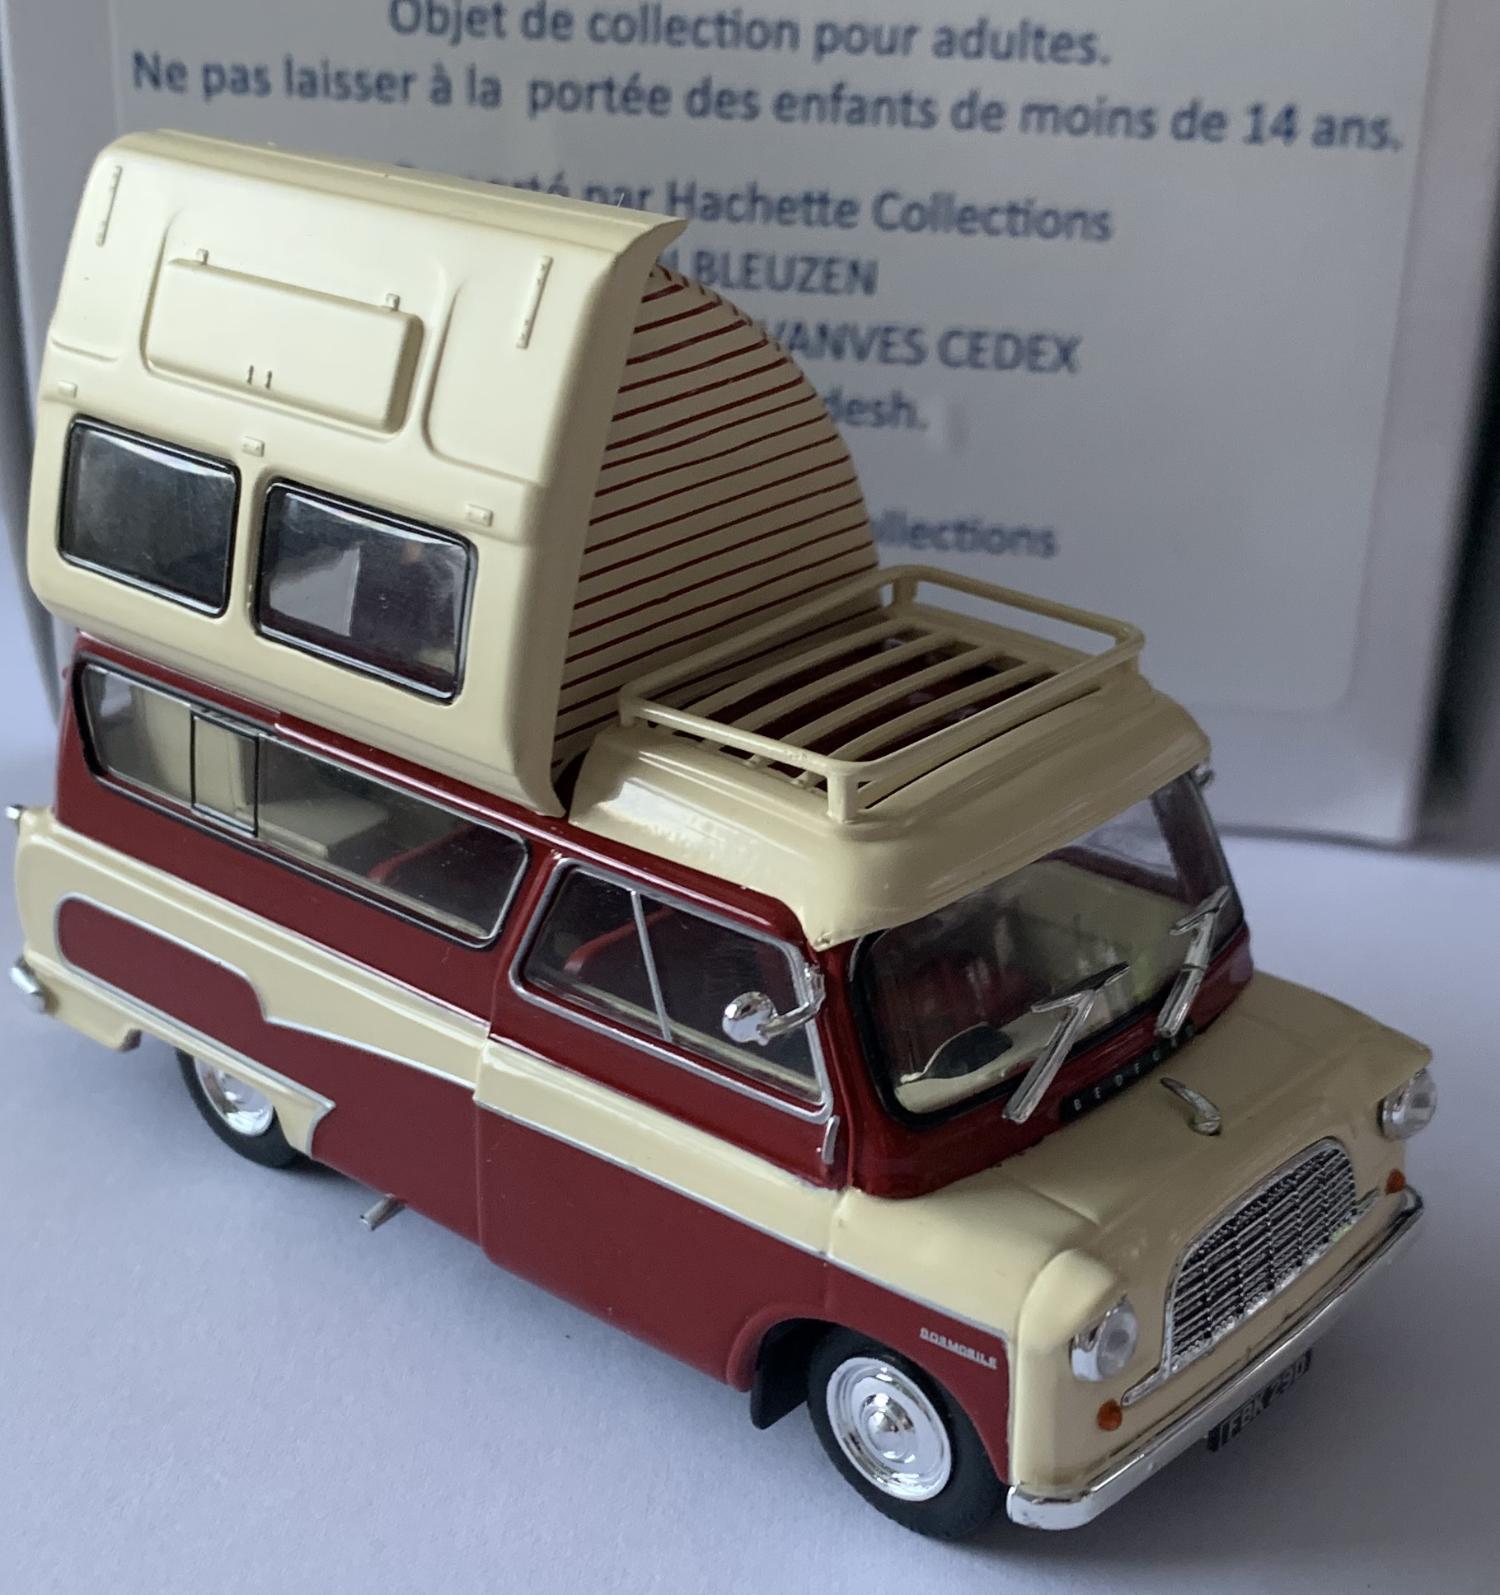 The model shown here is a good example of a Bedford CA Dormobile Camping Car decorated in maroon and cream